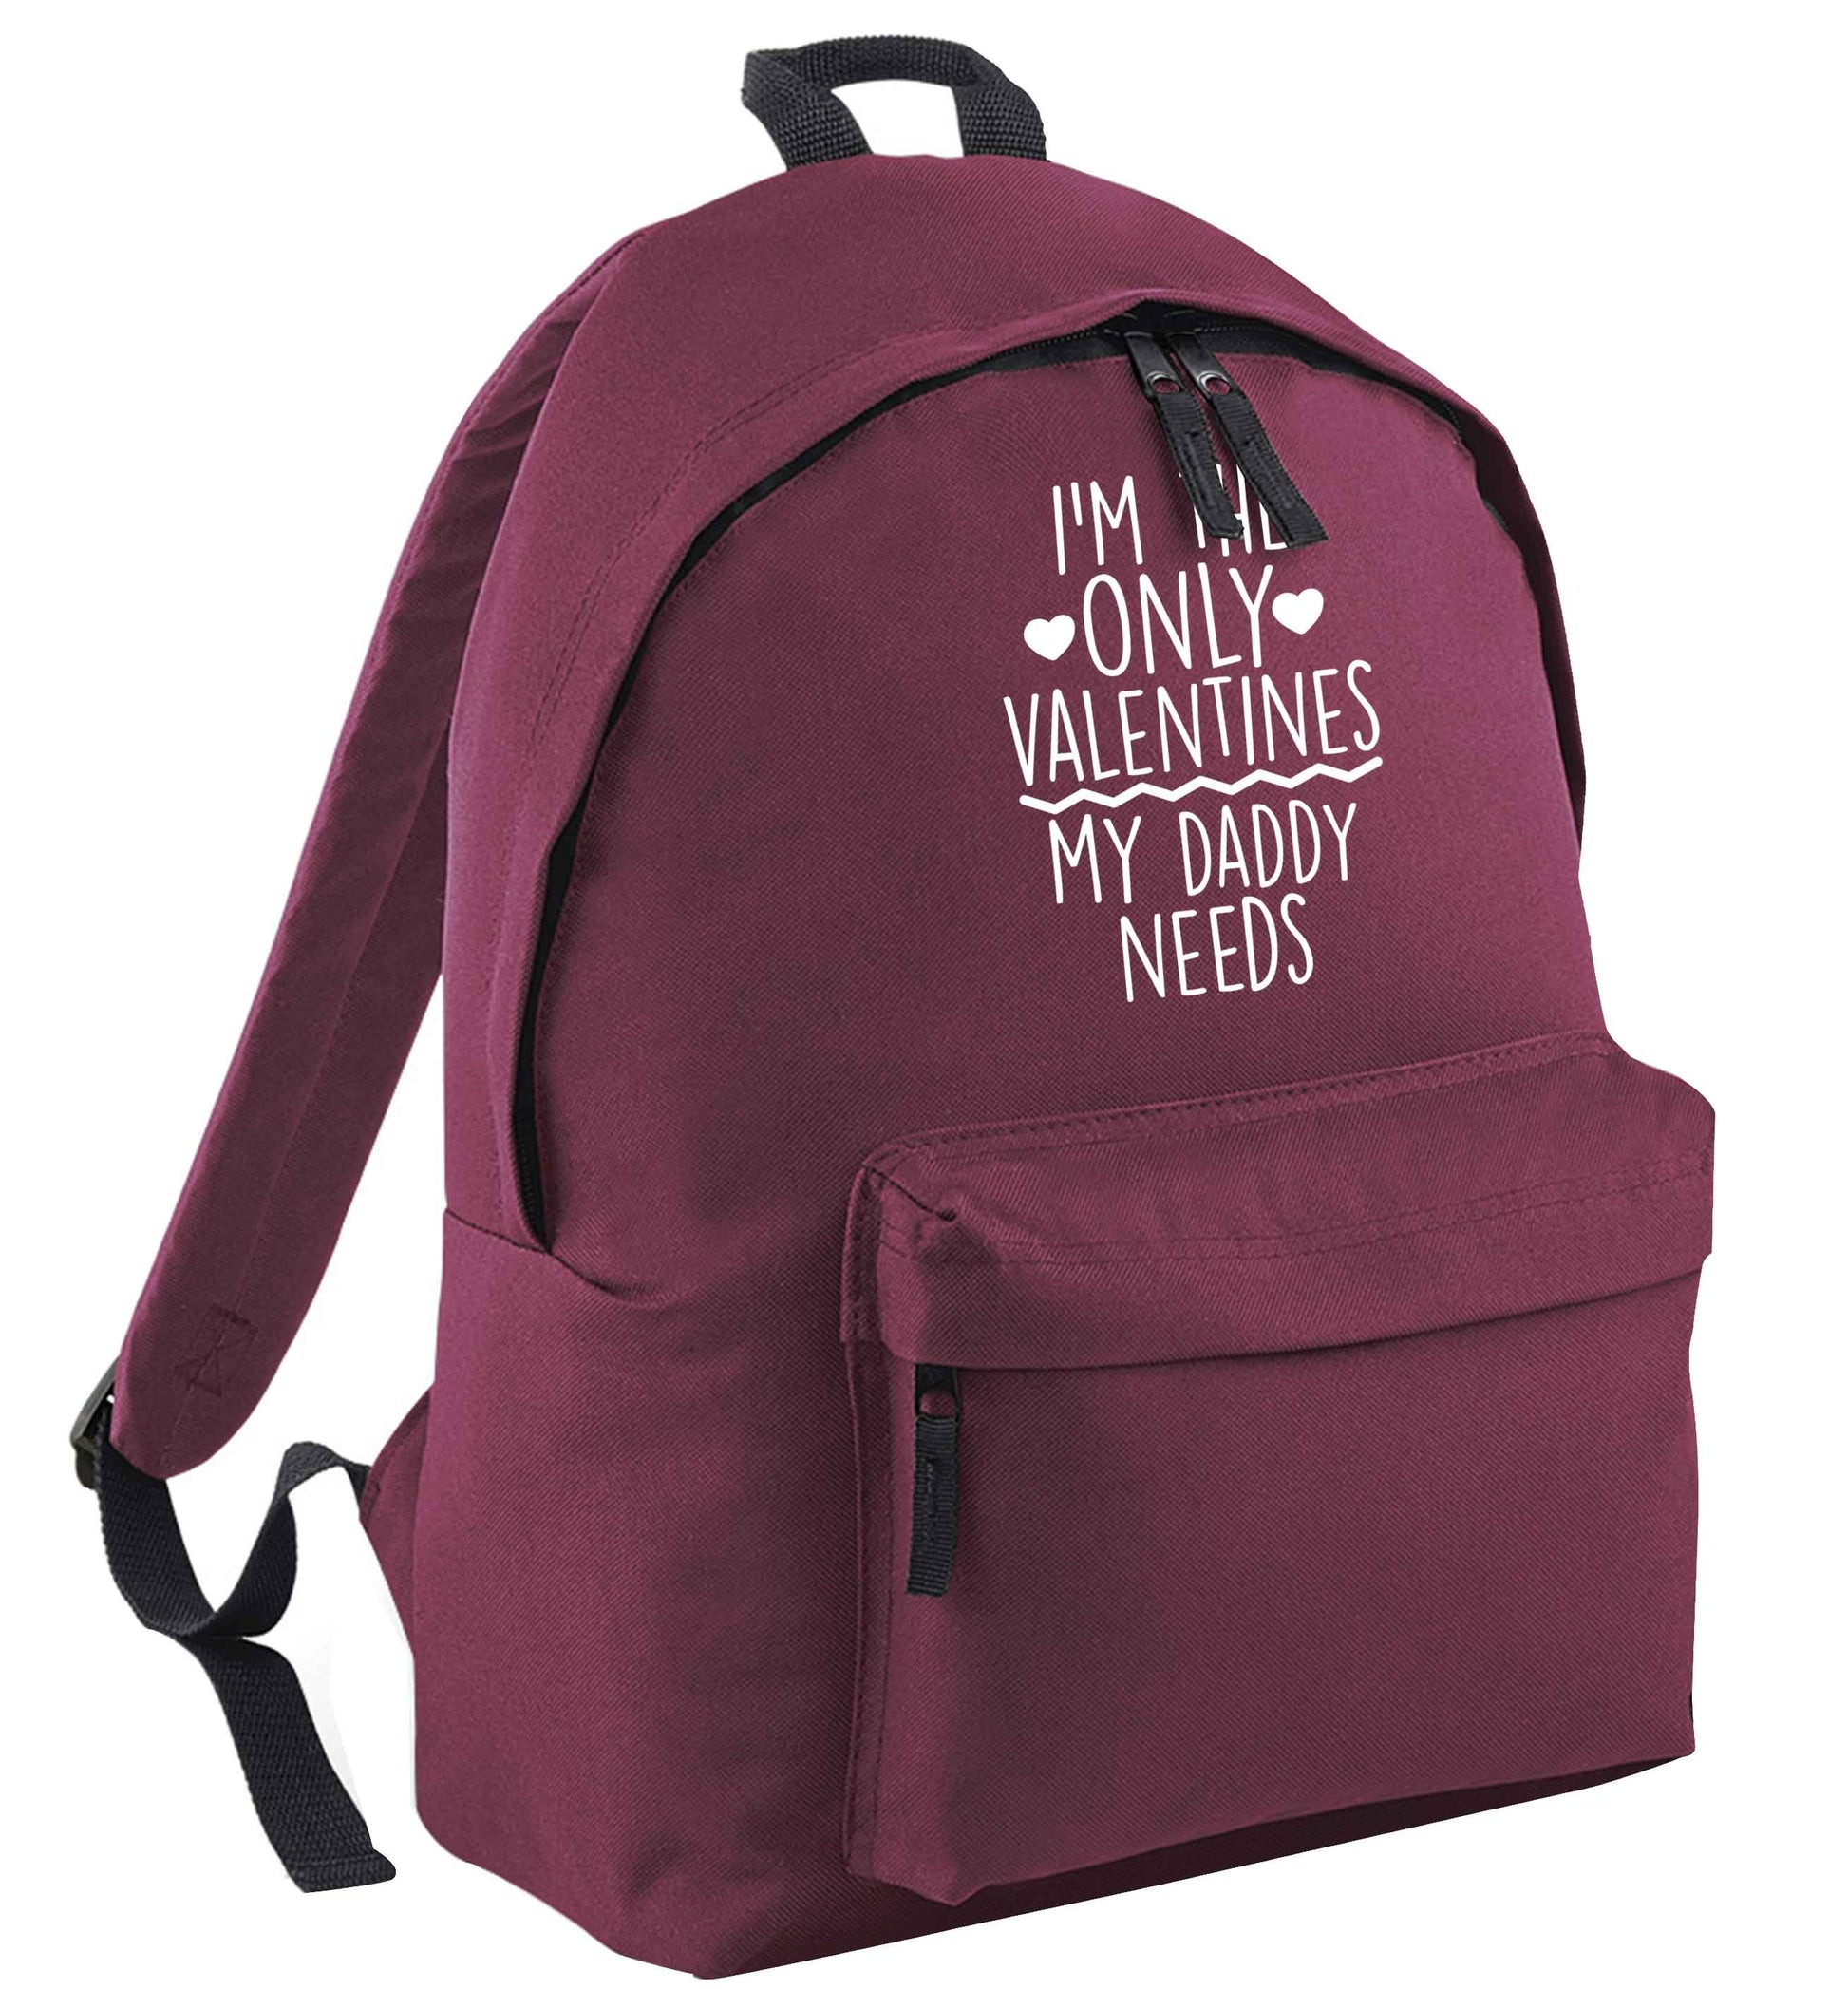 I'm the only valentines my daddy needs black adults backpack